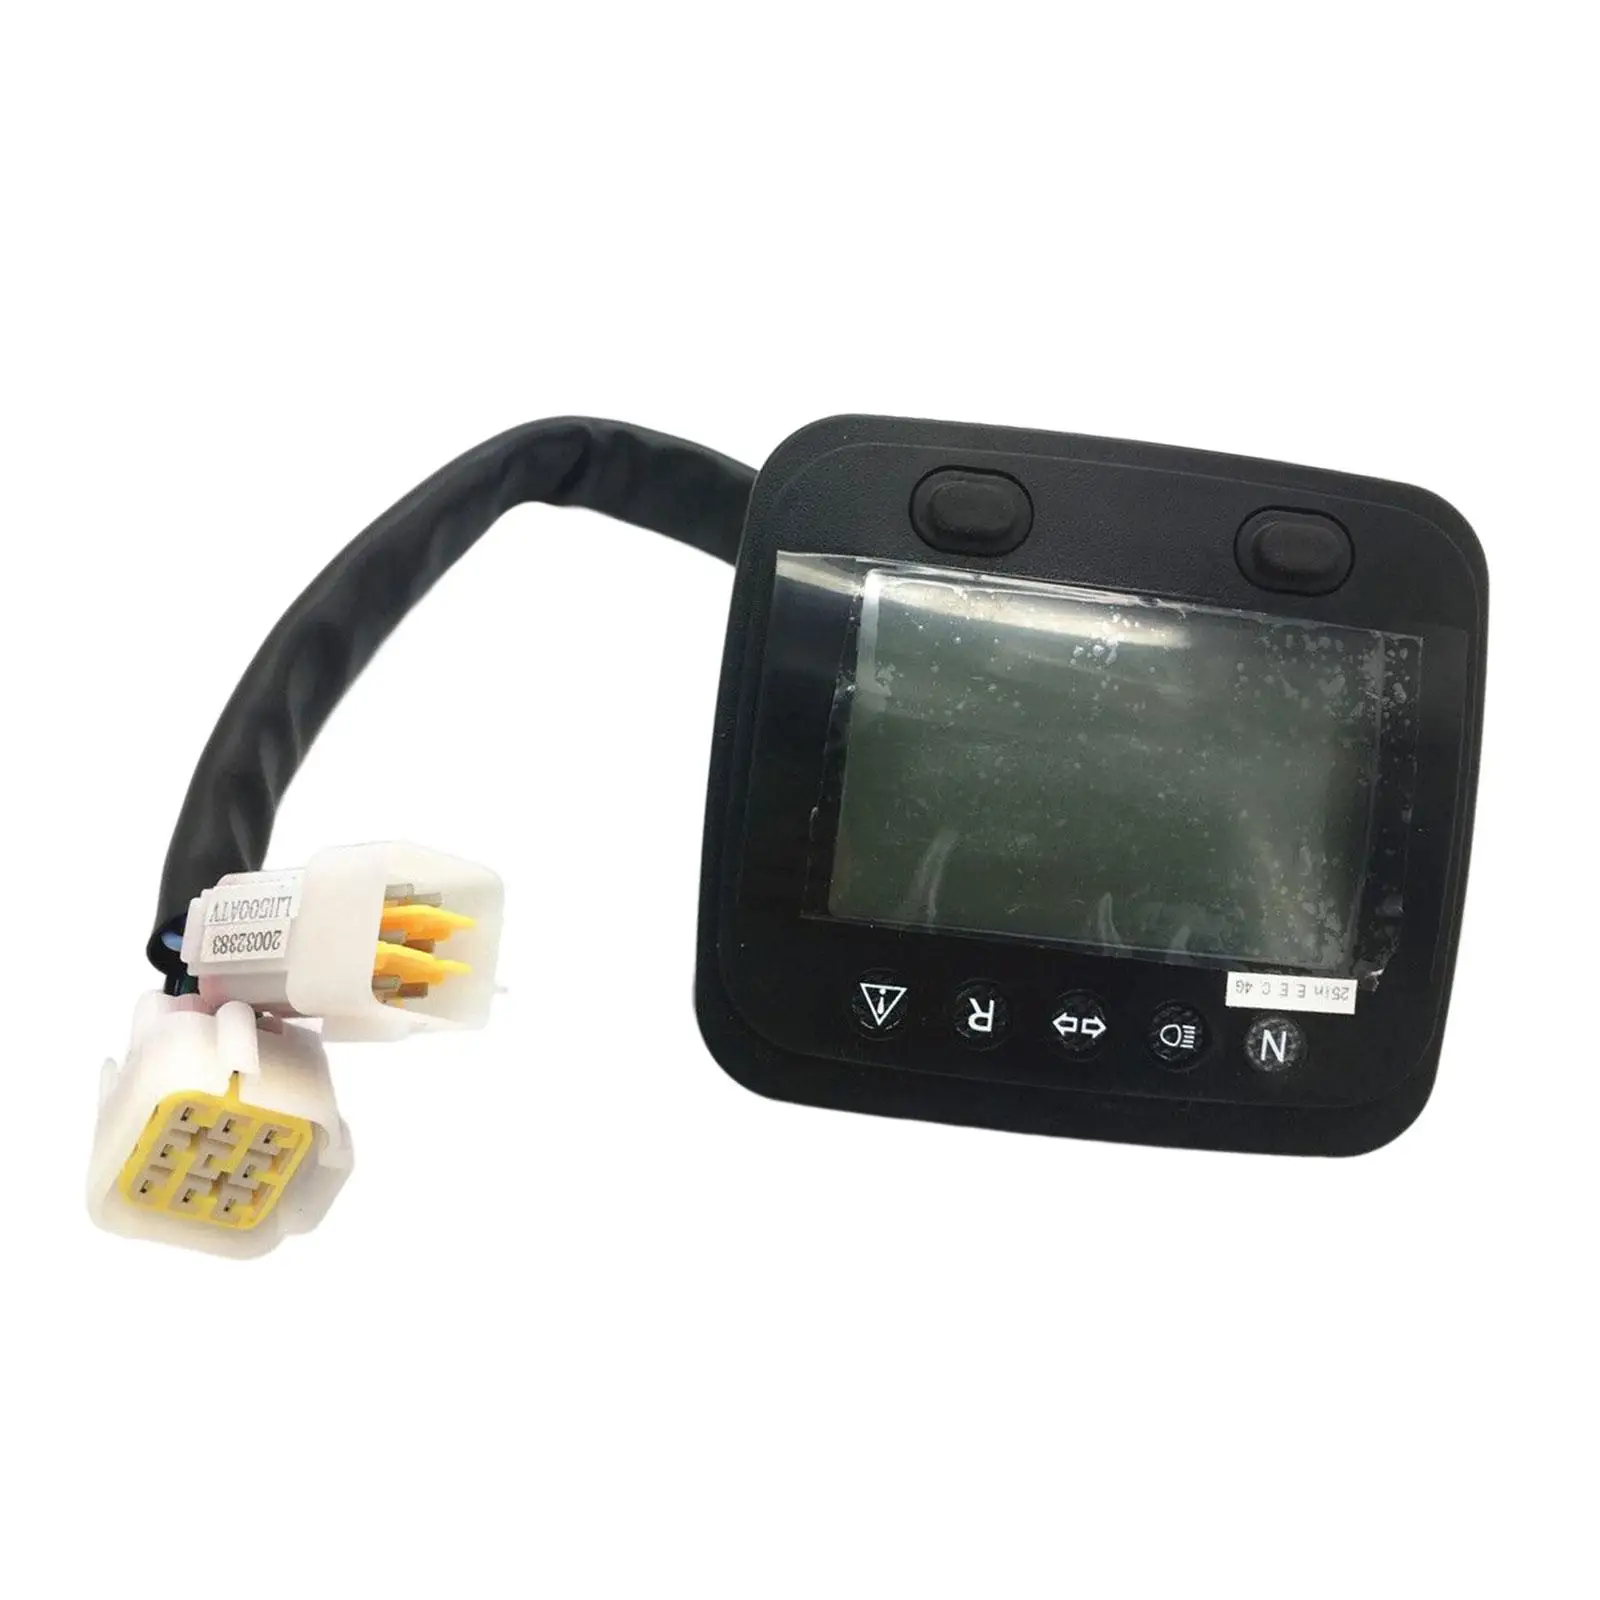 LCD Speedometer Meter Professional Sturdy Accs Good Performance Easy to Install Repair Parts Motorcycle Gauge for 500cc ATV